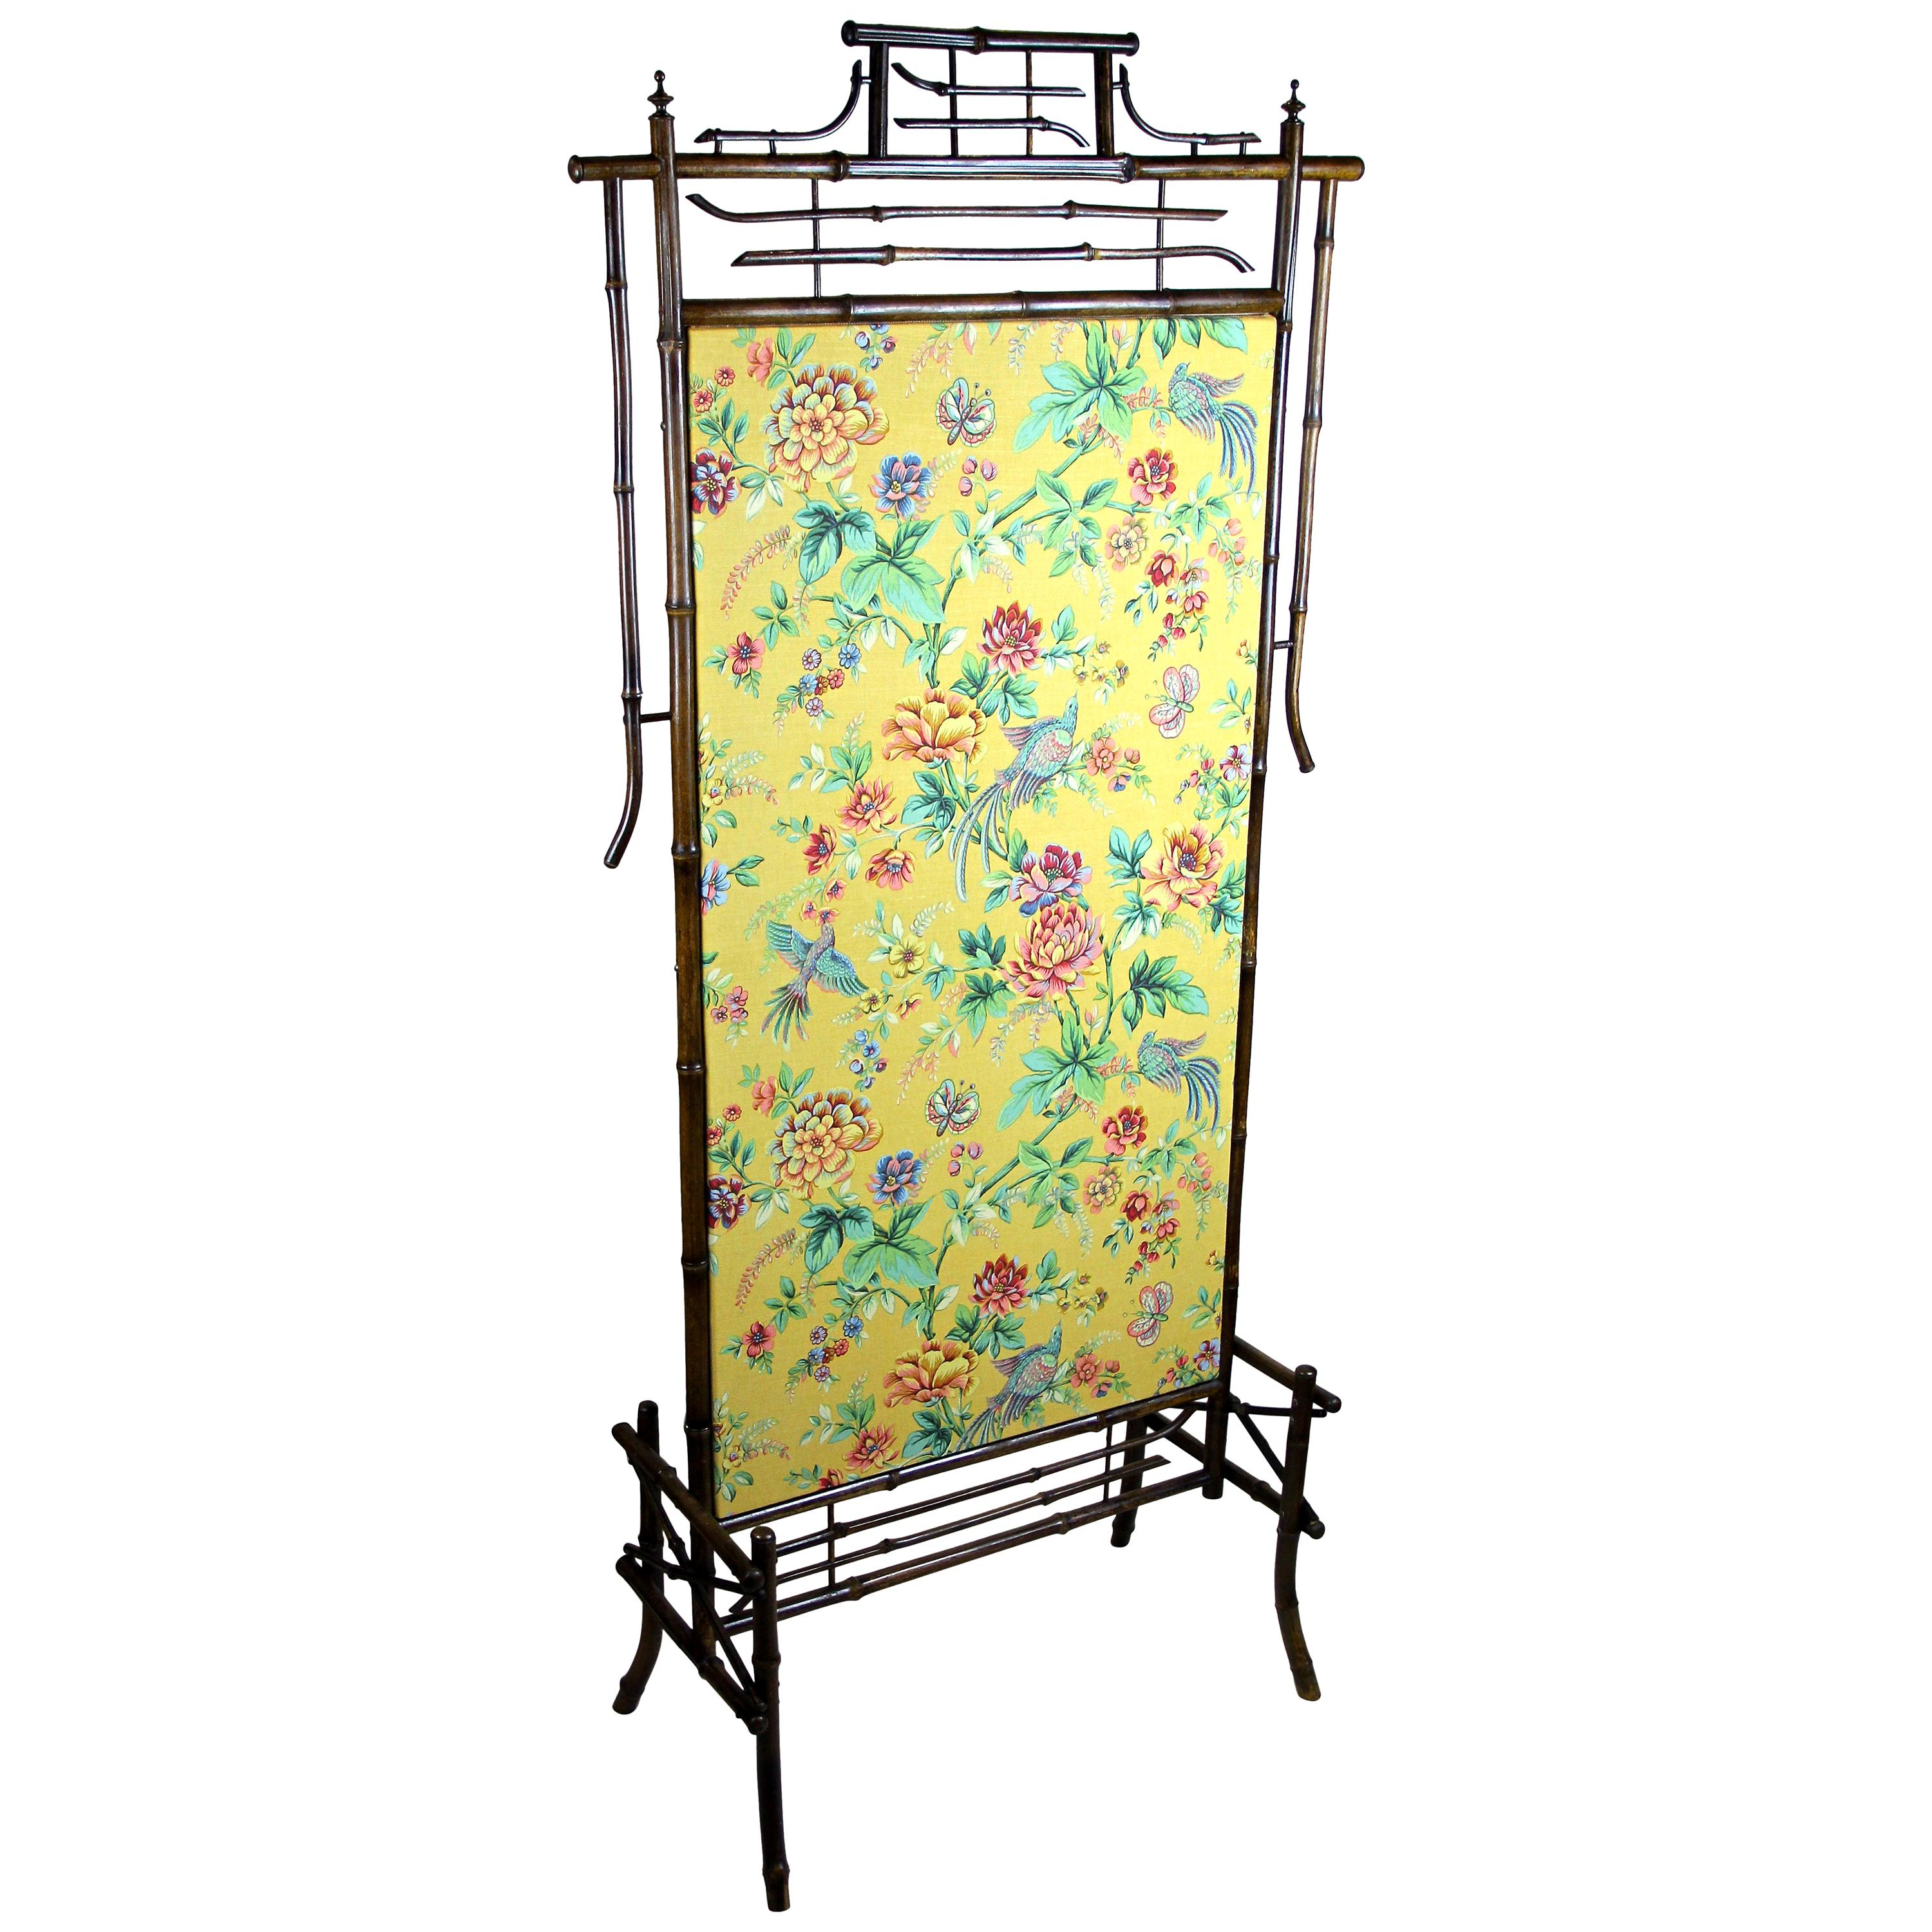 From the very early 20th century, the rise of the Art Nouveau era in Austria comes this outstanding bamboo screen. The elaborately composed bamboo frame gives this unique screen a kind of Asian look and shows a newly upholstered panel with a very